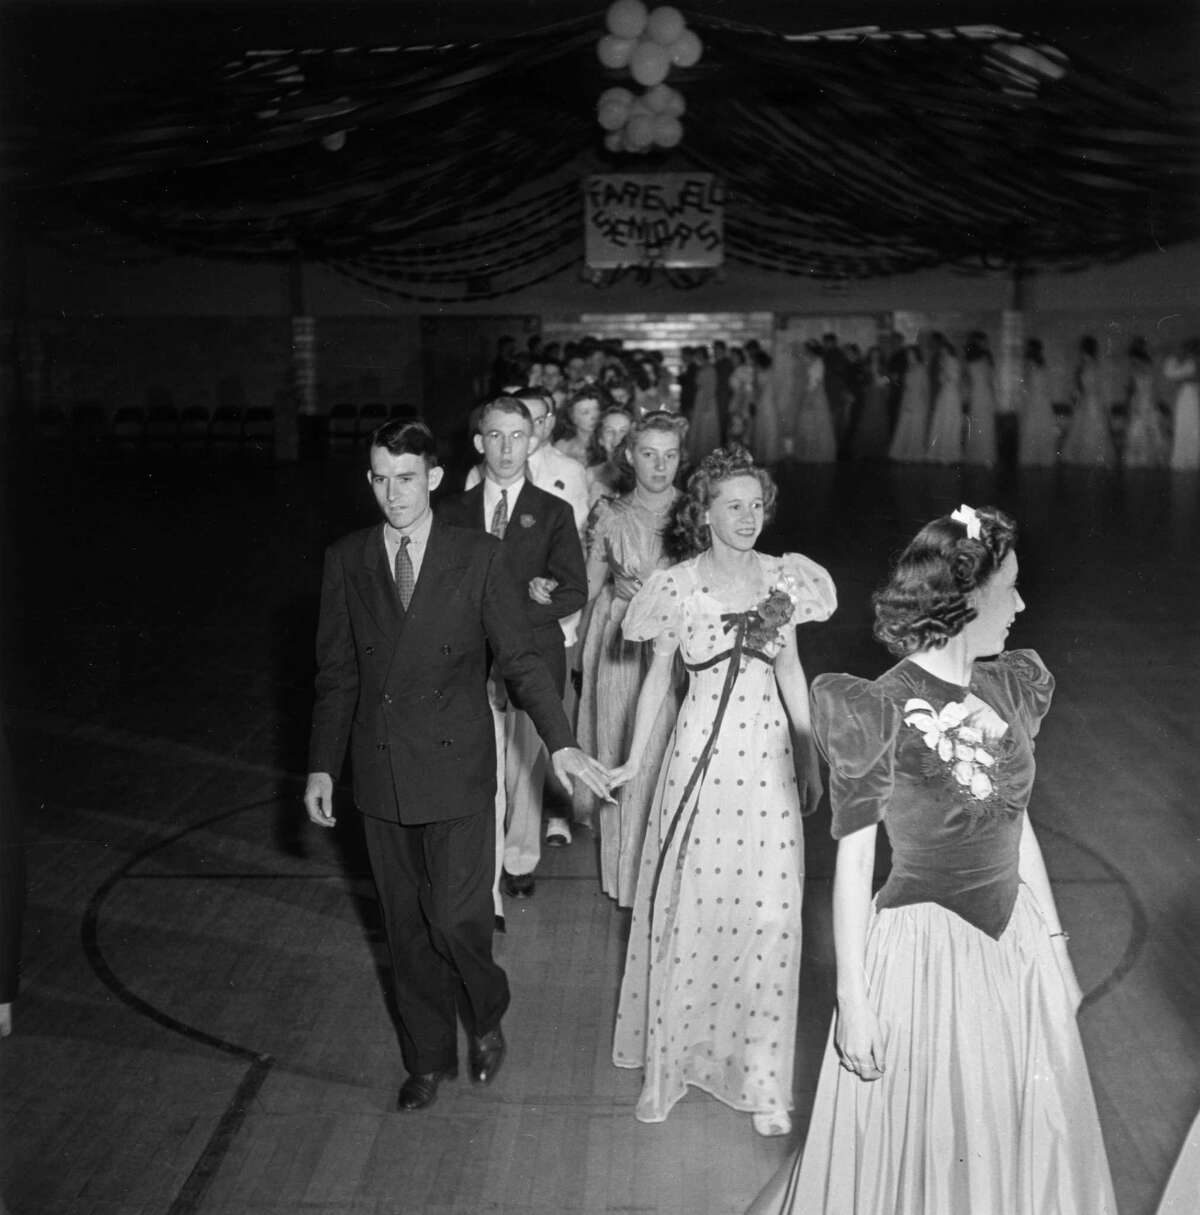 1942: High school seniors cross a gymnasium floor in a double file line at their prom dance, Greenbelt, Maryland.